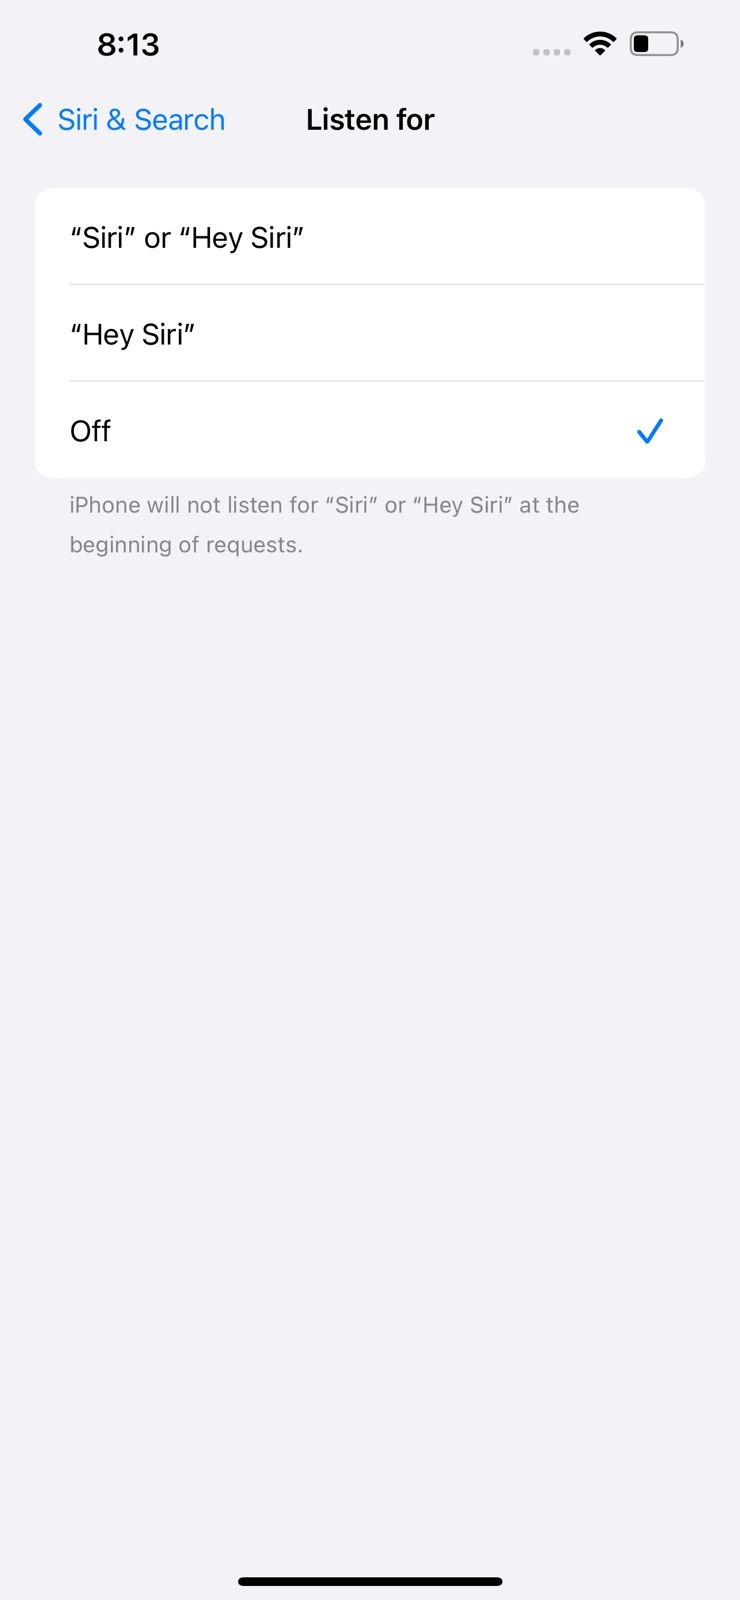 Prеss Sidе Button for Siri